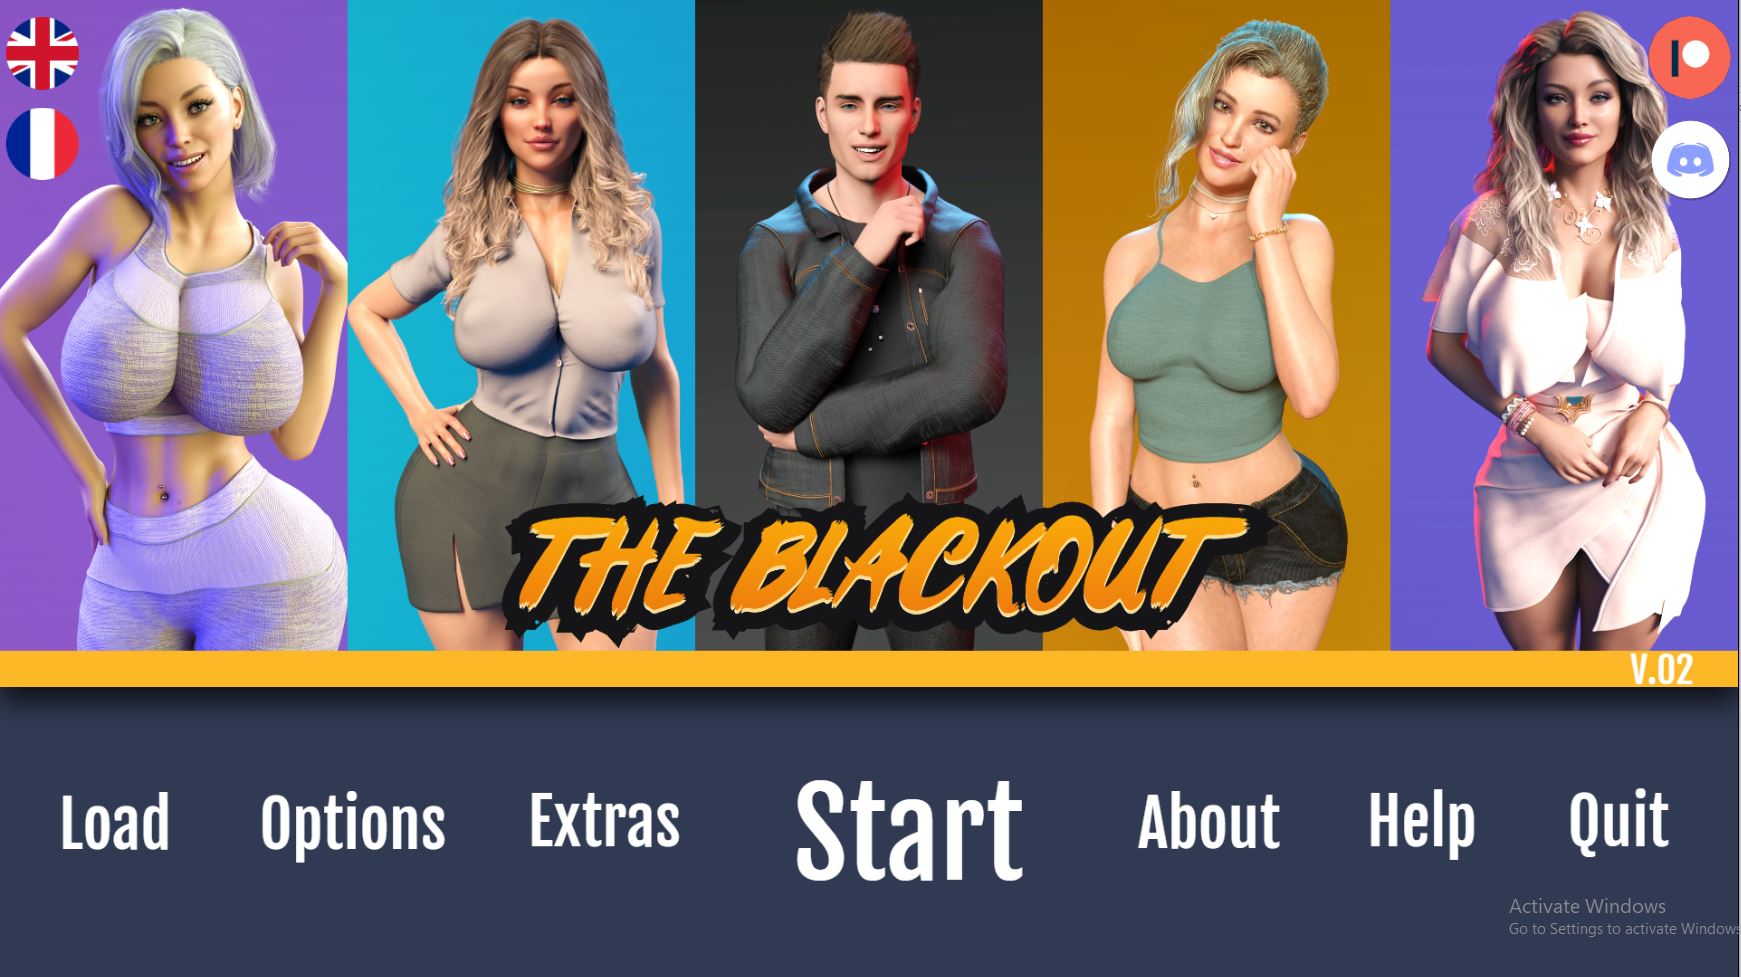 Adultgamesworld Free Porn Games and Sex Games » The Blackout